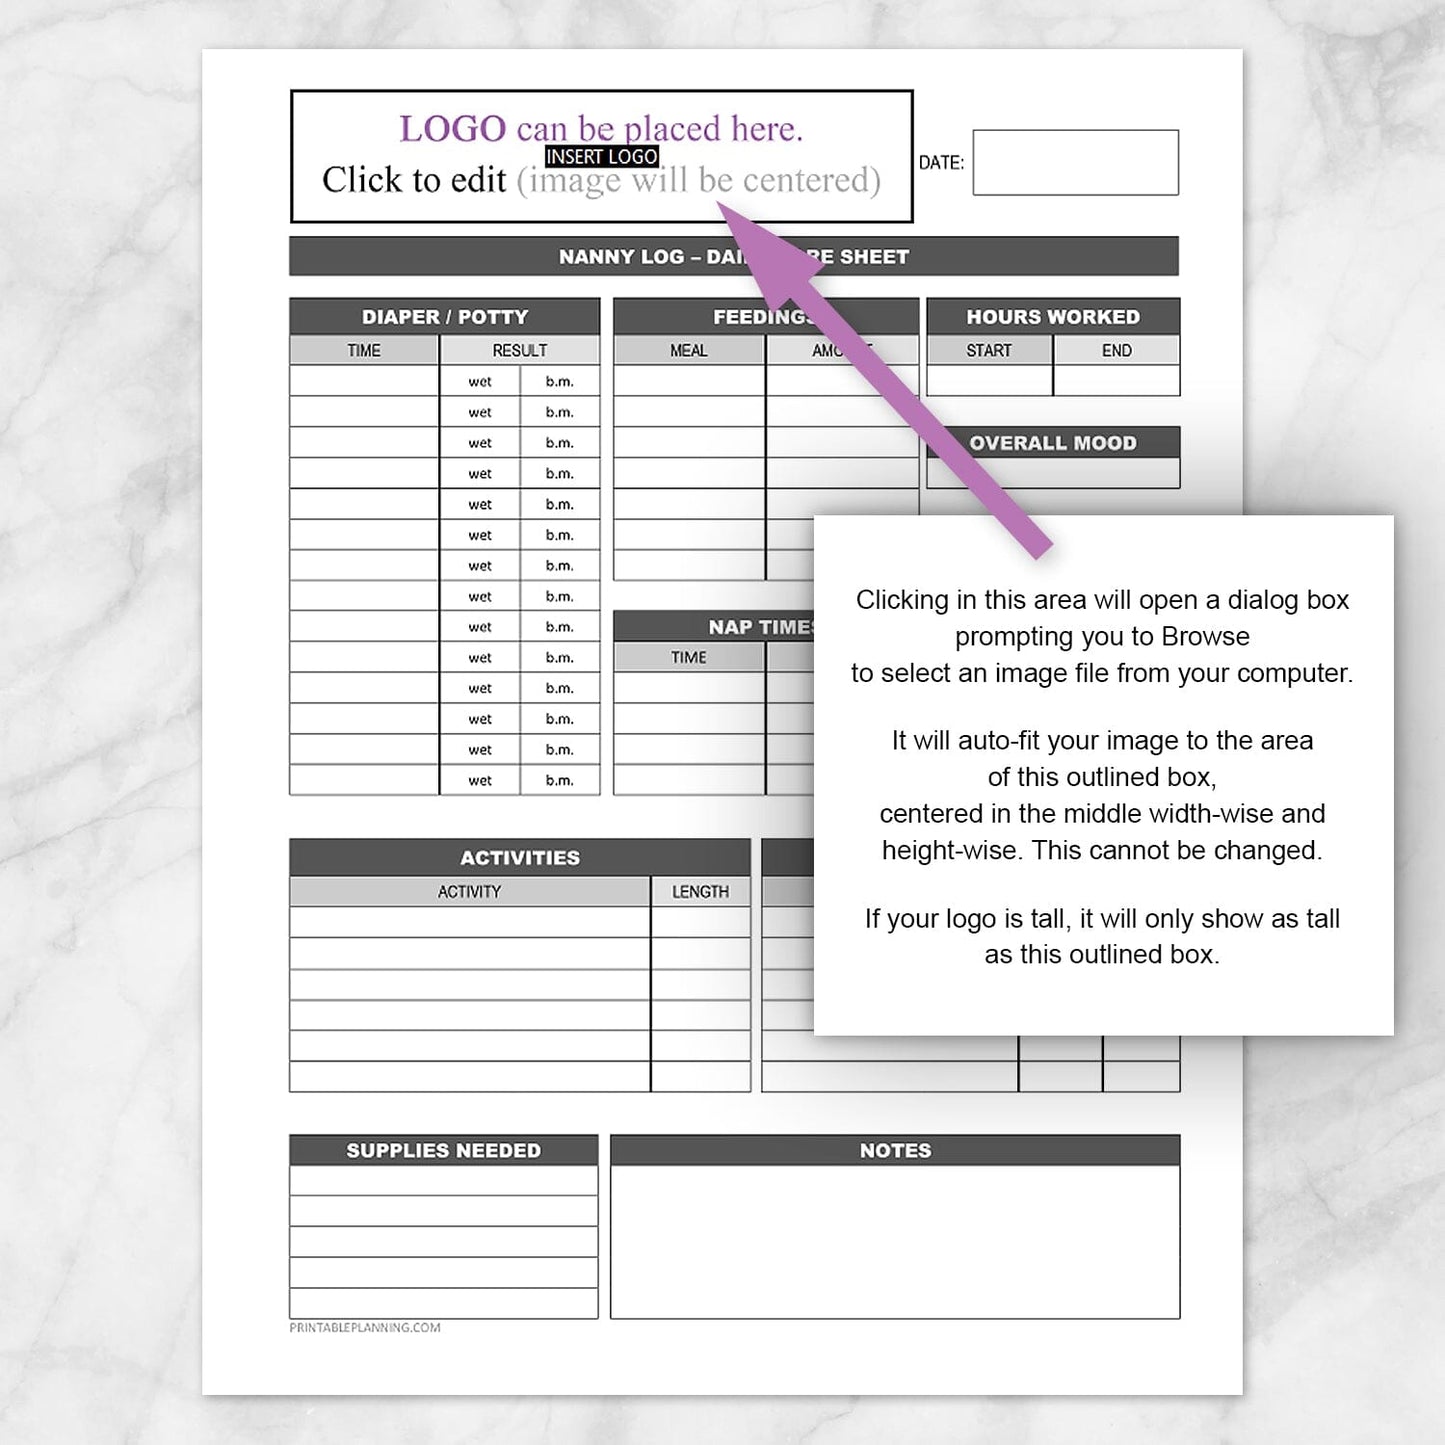 Printable Nanny Log with Your Logo - Daily Infant and Child Care Sheet at Printable Planning. Instructions for editing PDF image.